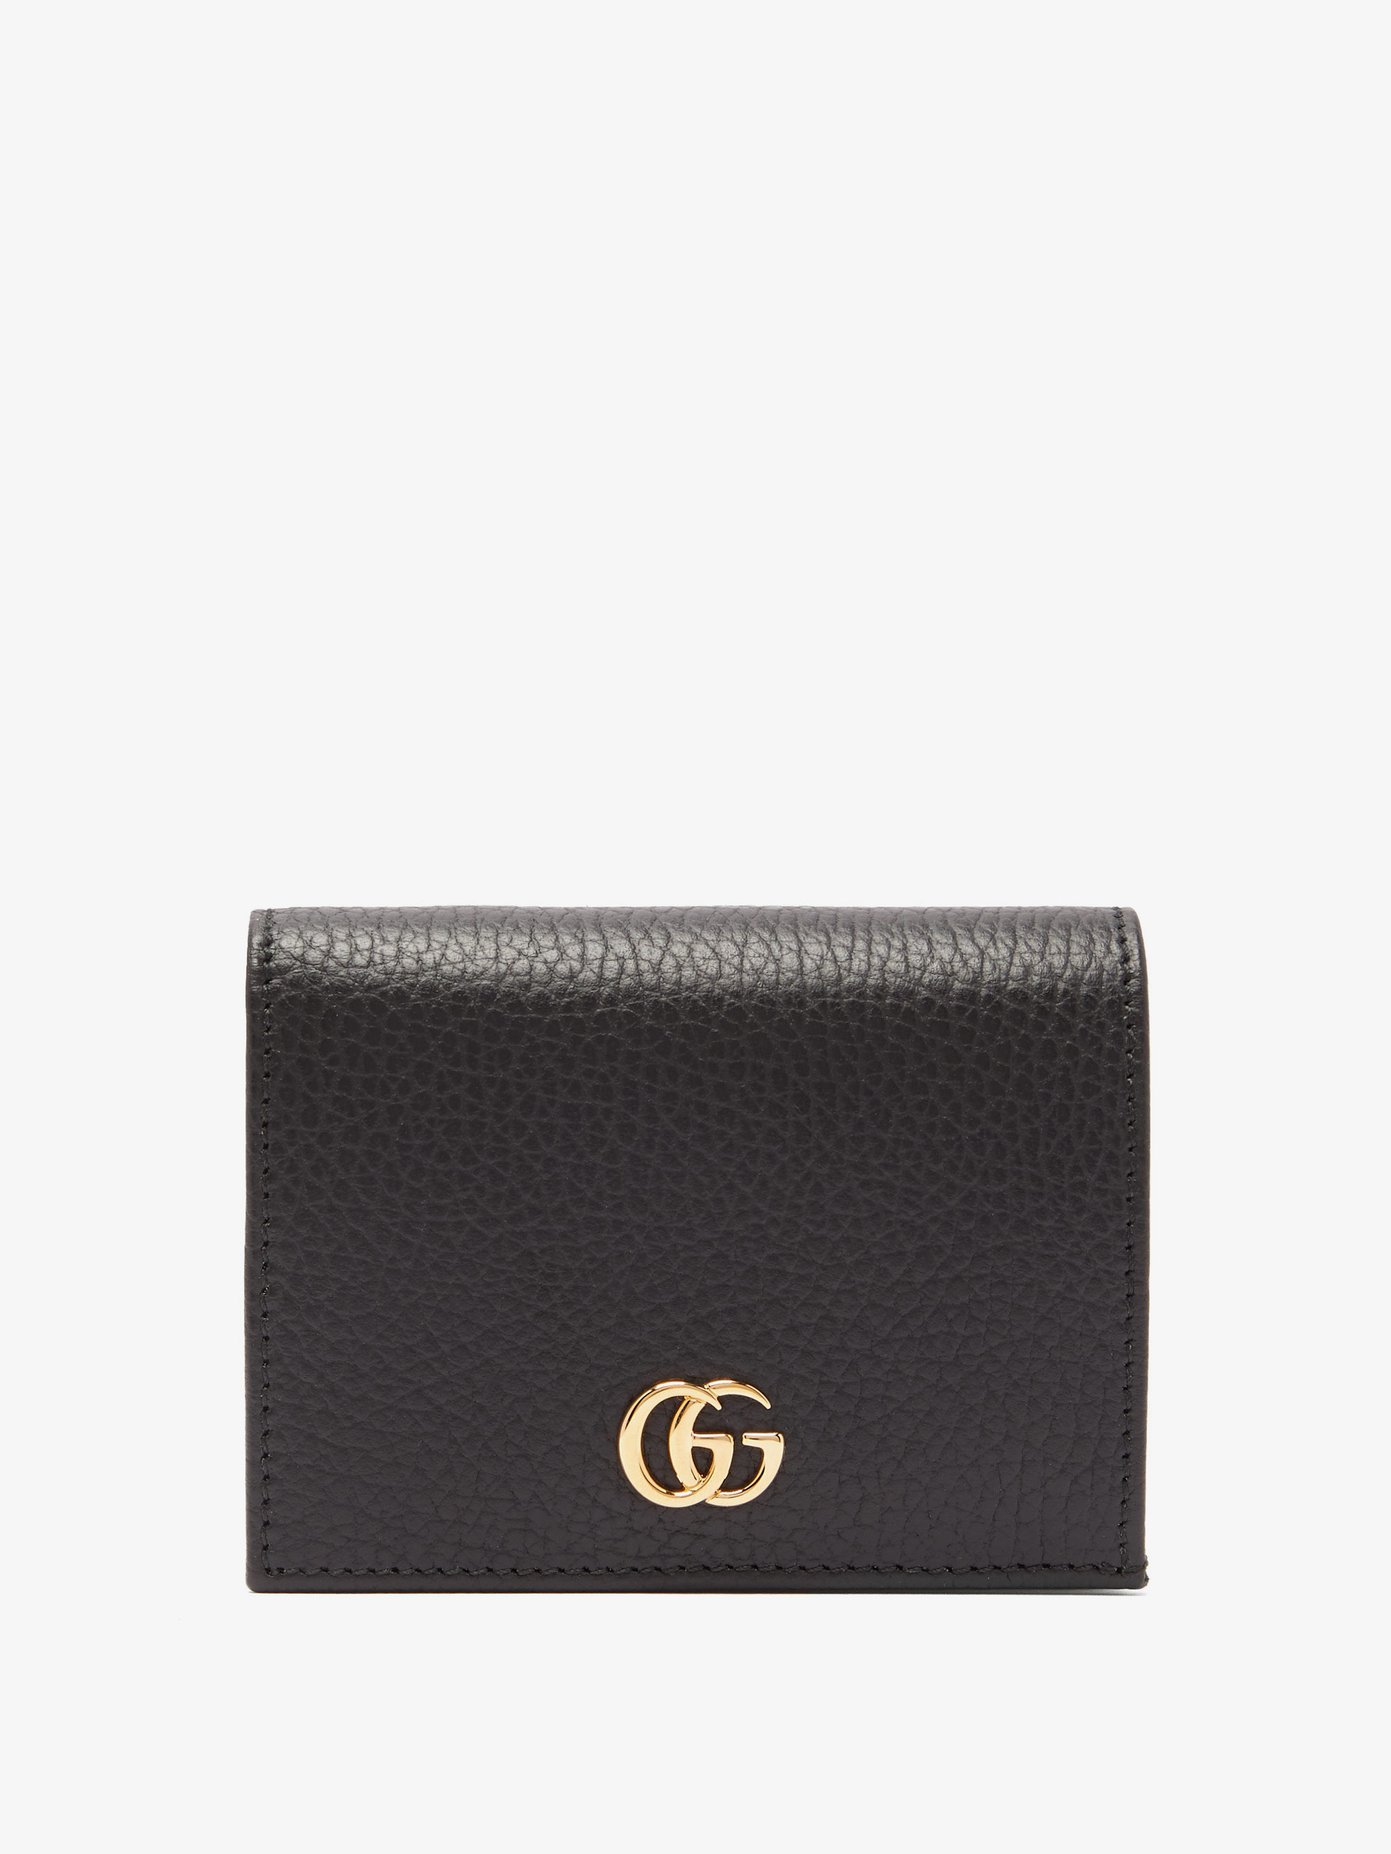 gucci small leather wallet